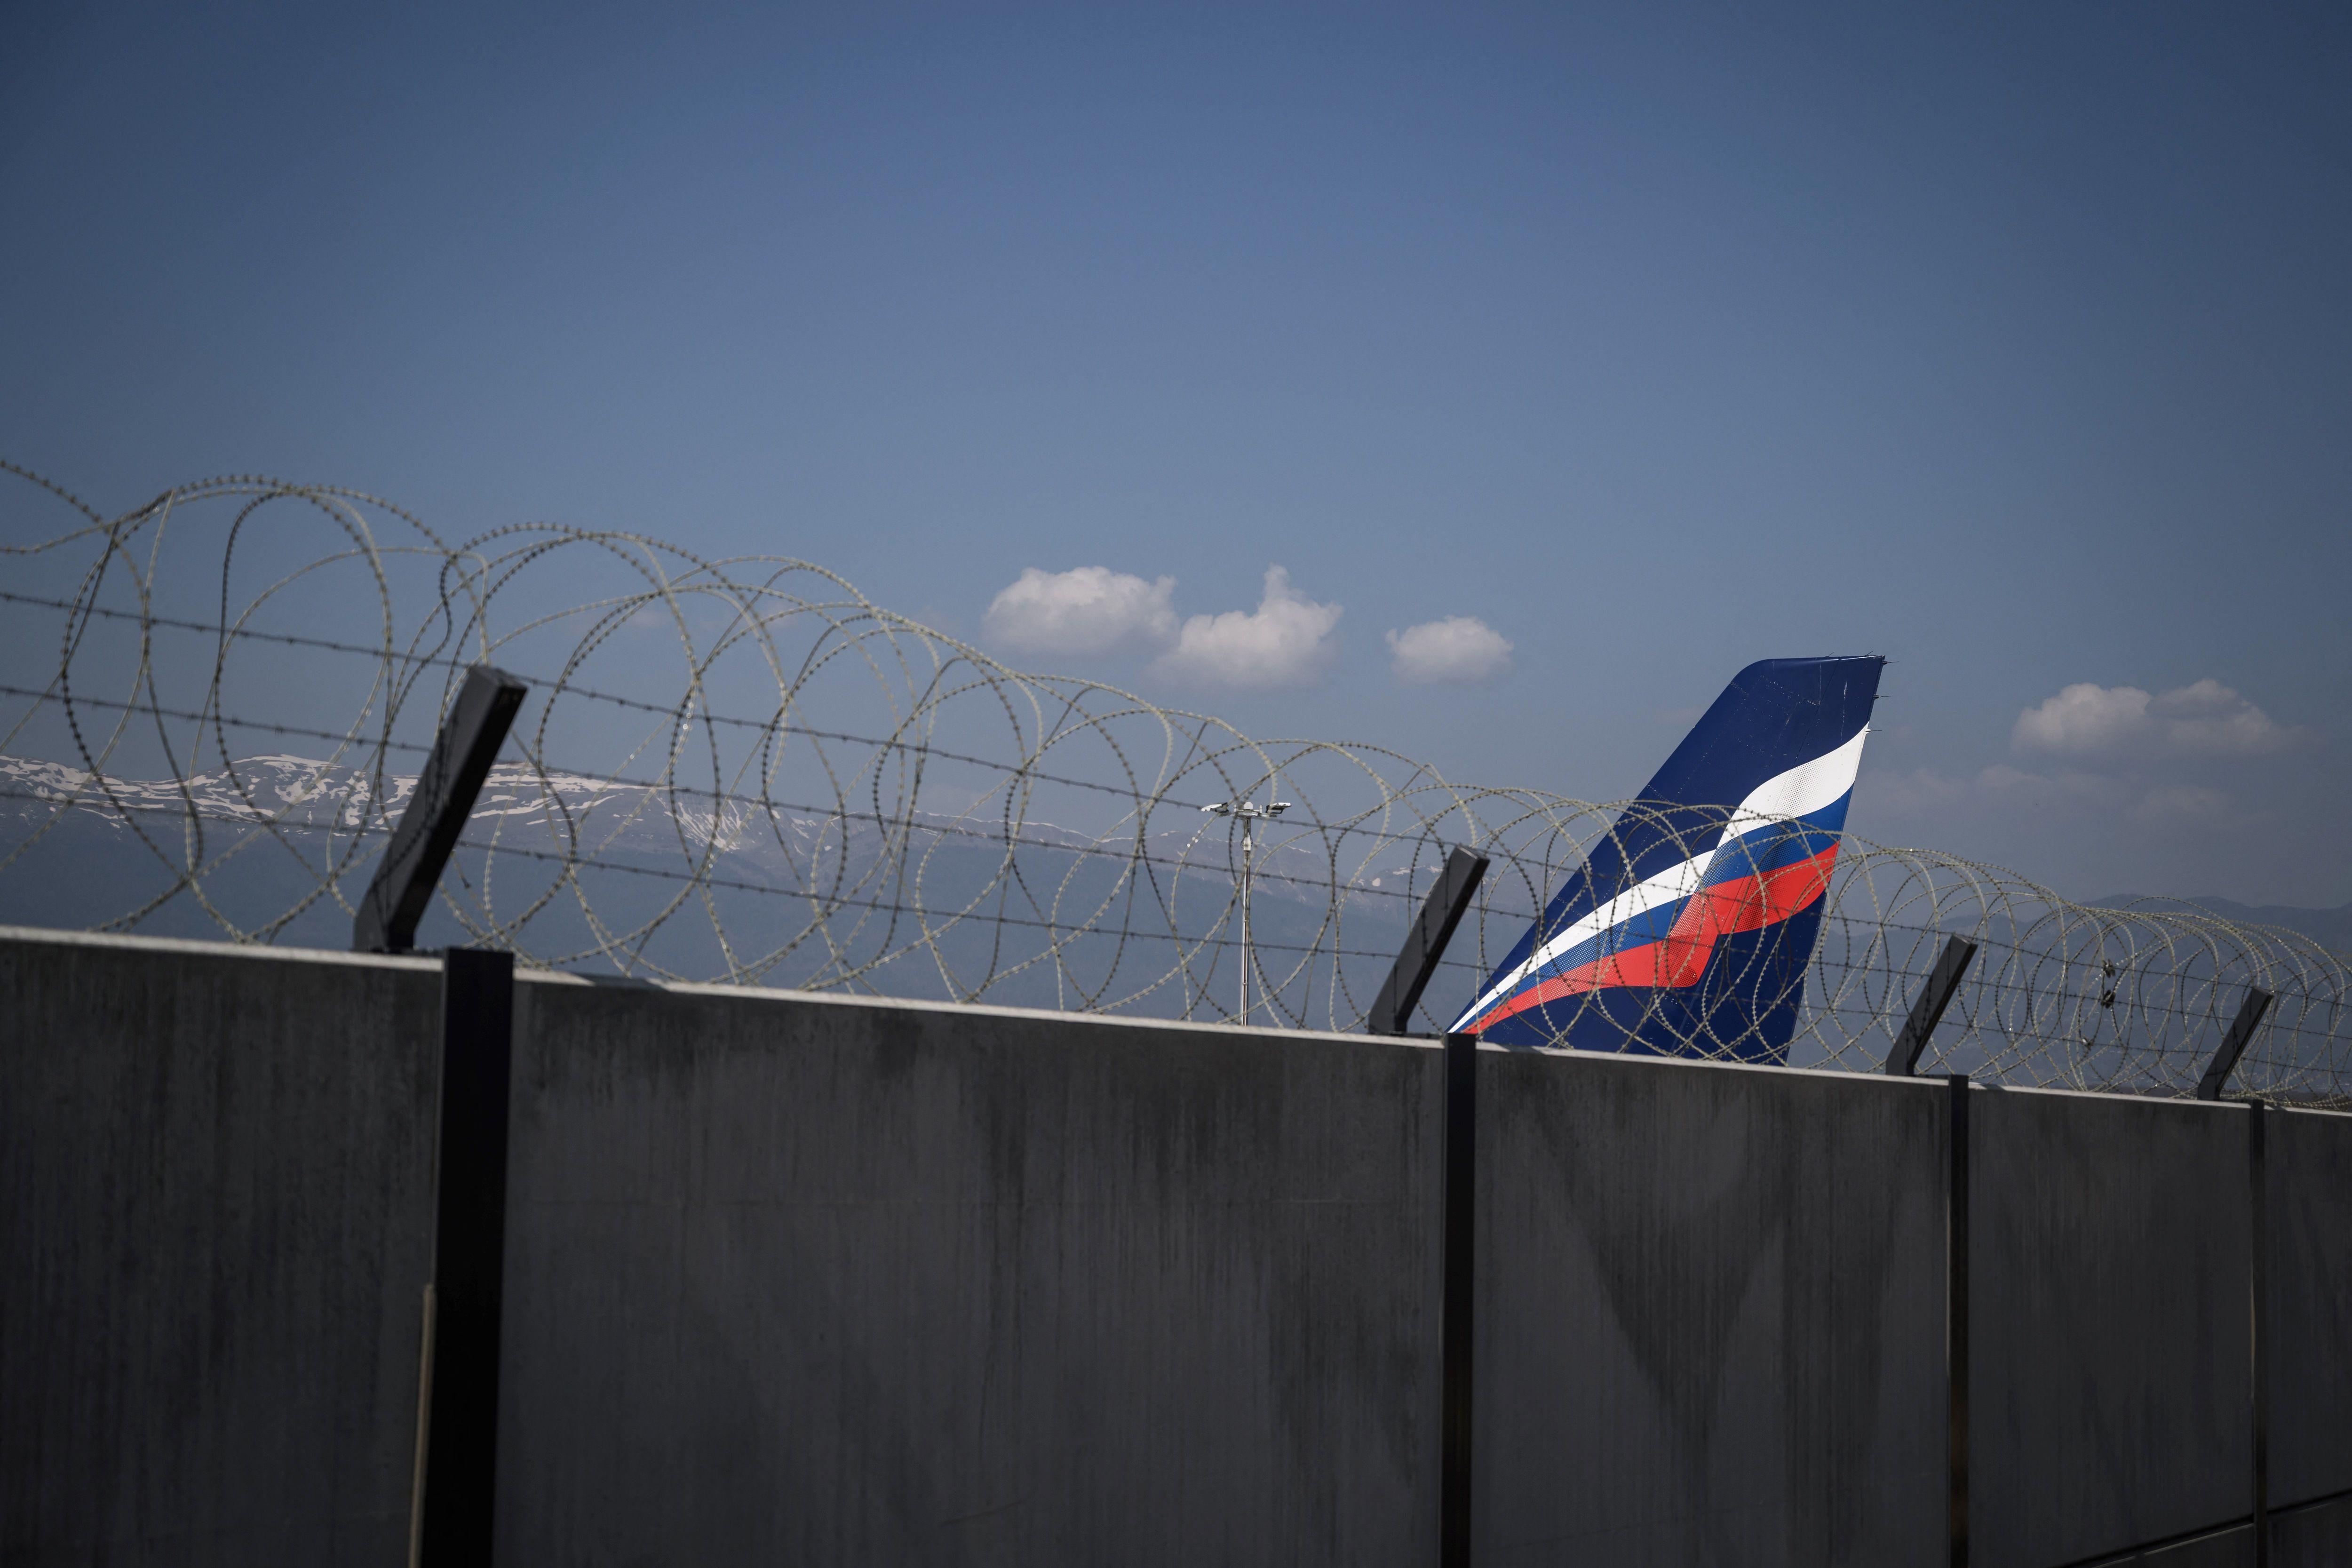 The tail of an Airbus A321-211 aircraft of Russian airline Aeroflot with registration VP-BOE is seen over the wall of the long term parking for planes of Geneva Airport on March 25, 2022.